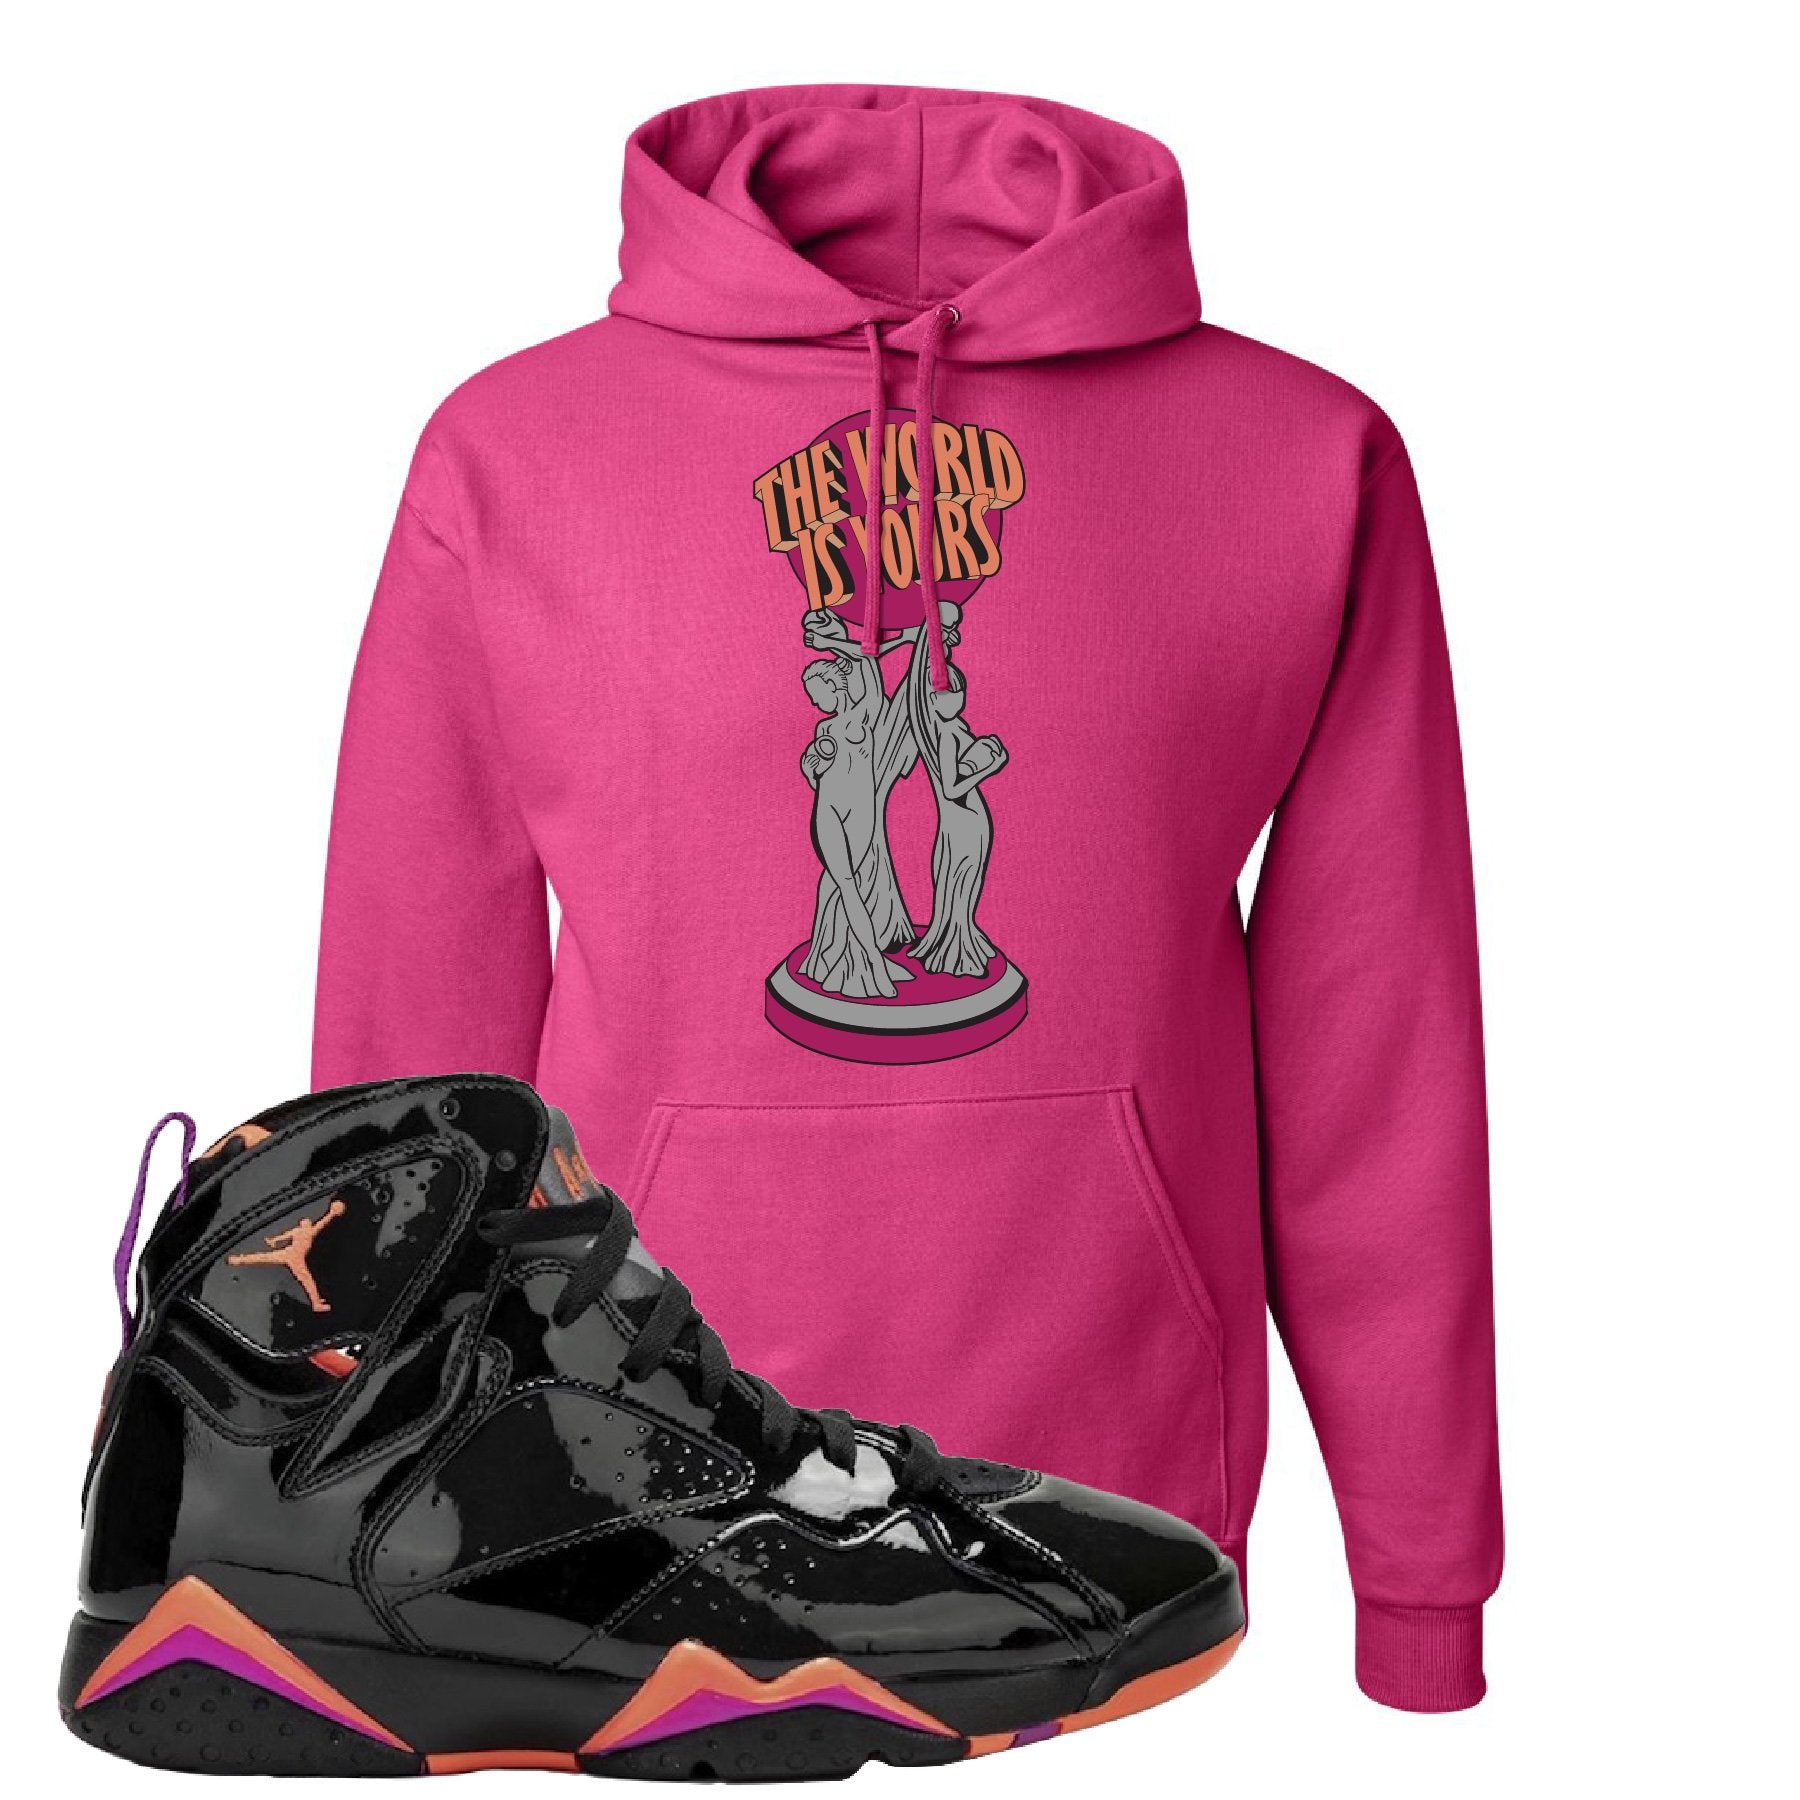 Jordan 7 WMNS Black Patent Leather The World Is Yours Statue Cyber Pink Sneaker Hook Up Pullover Hoodie